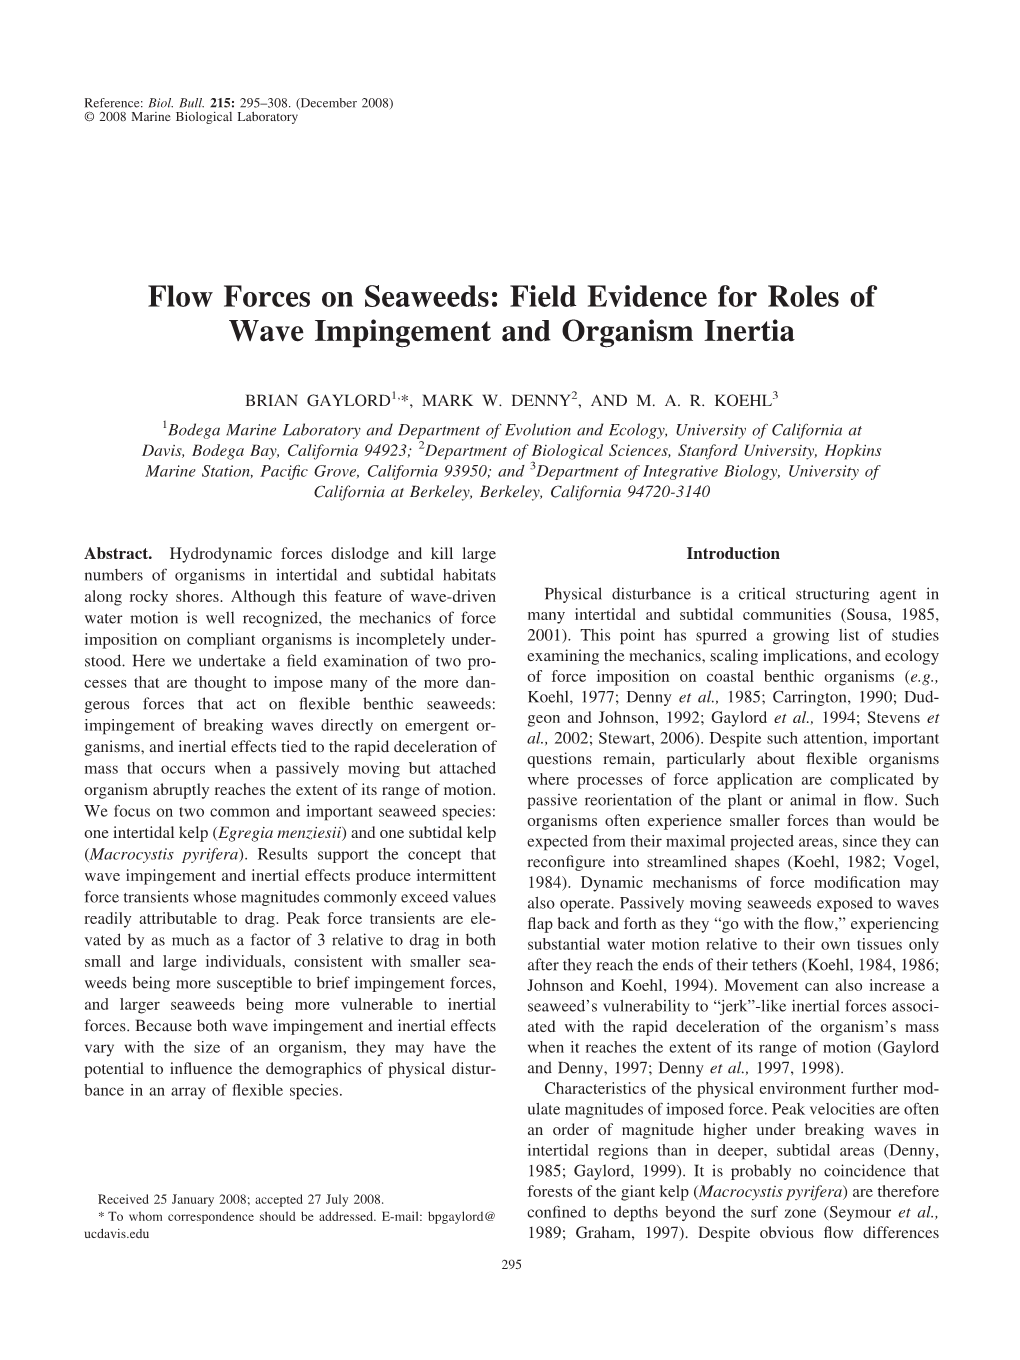 Flow Forces on Seaweeds: Field Evidence for Roles of Wave Impingement and Organism Inertia